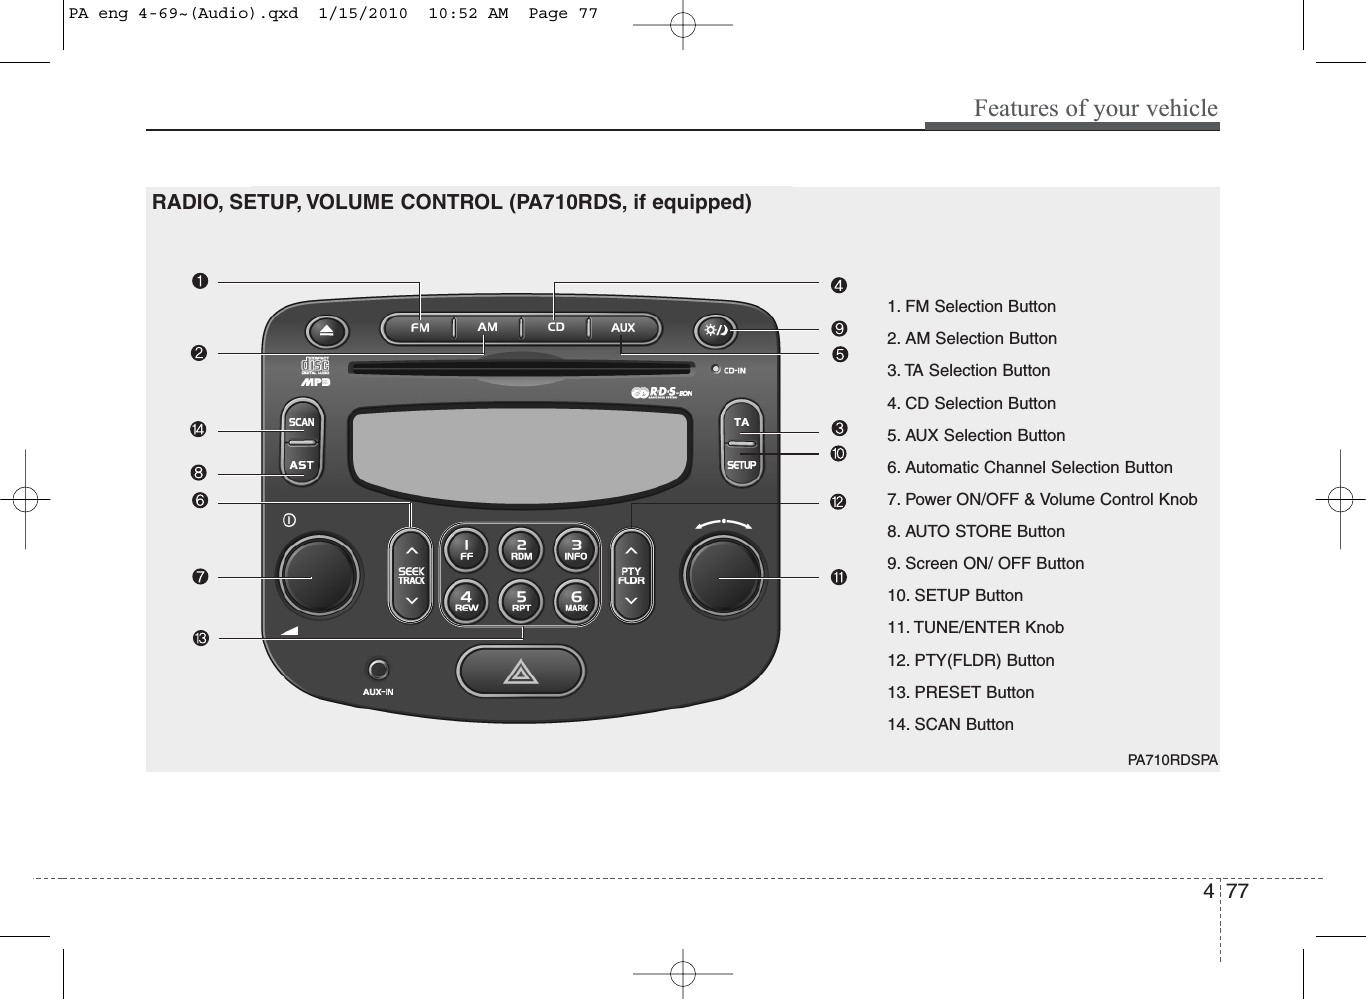 477Features of your vehiclePA710RDSPA1. FM Selection Button2. AM Selection Button3. TA Selection Button4. CD Selection Button5. AUX Selection Button6. Automatic Channel Selection Button7. Power ON/OFF &amp; Volume Control Knob8. AUTO STORE Button9. Screen ON/ OFF Button10. SETUP Button11. TUNE/ENTER Knob12. PTY(FLDR) Button13. PRESET Button14. SCAN ButtonRADIO, SETUP, VOLUME CONTROL (PA710RDS, if equipped)PA eng 4-69~(Audio).qxd  1/15/2010  10:52 AM  Page 77